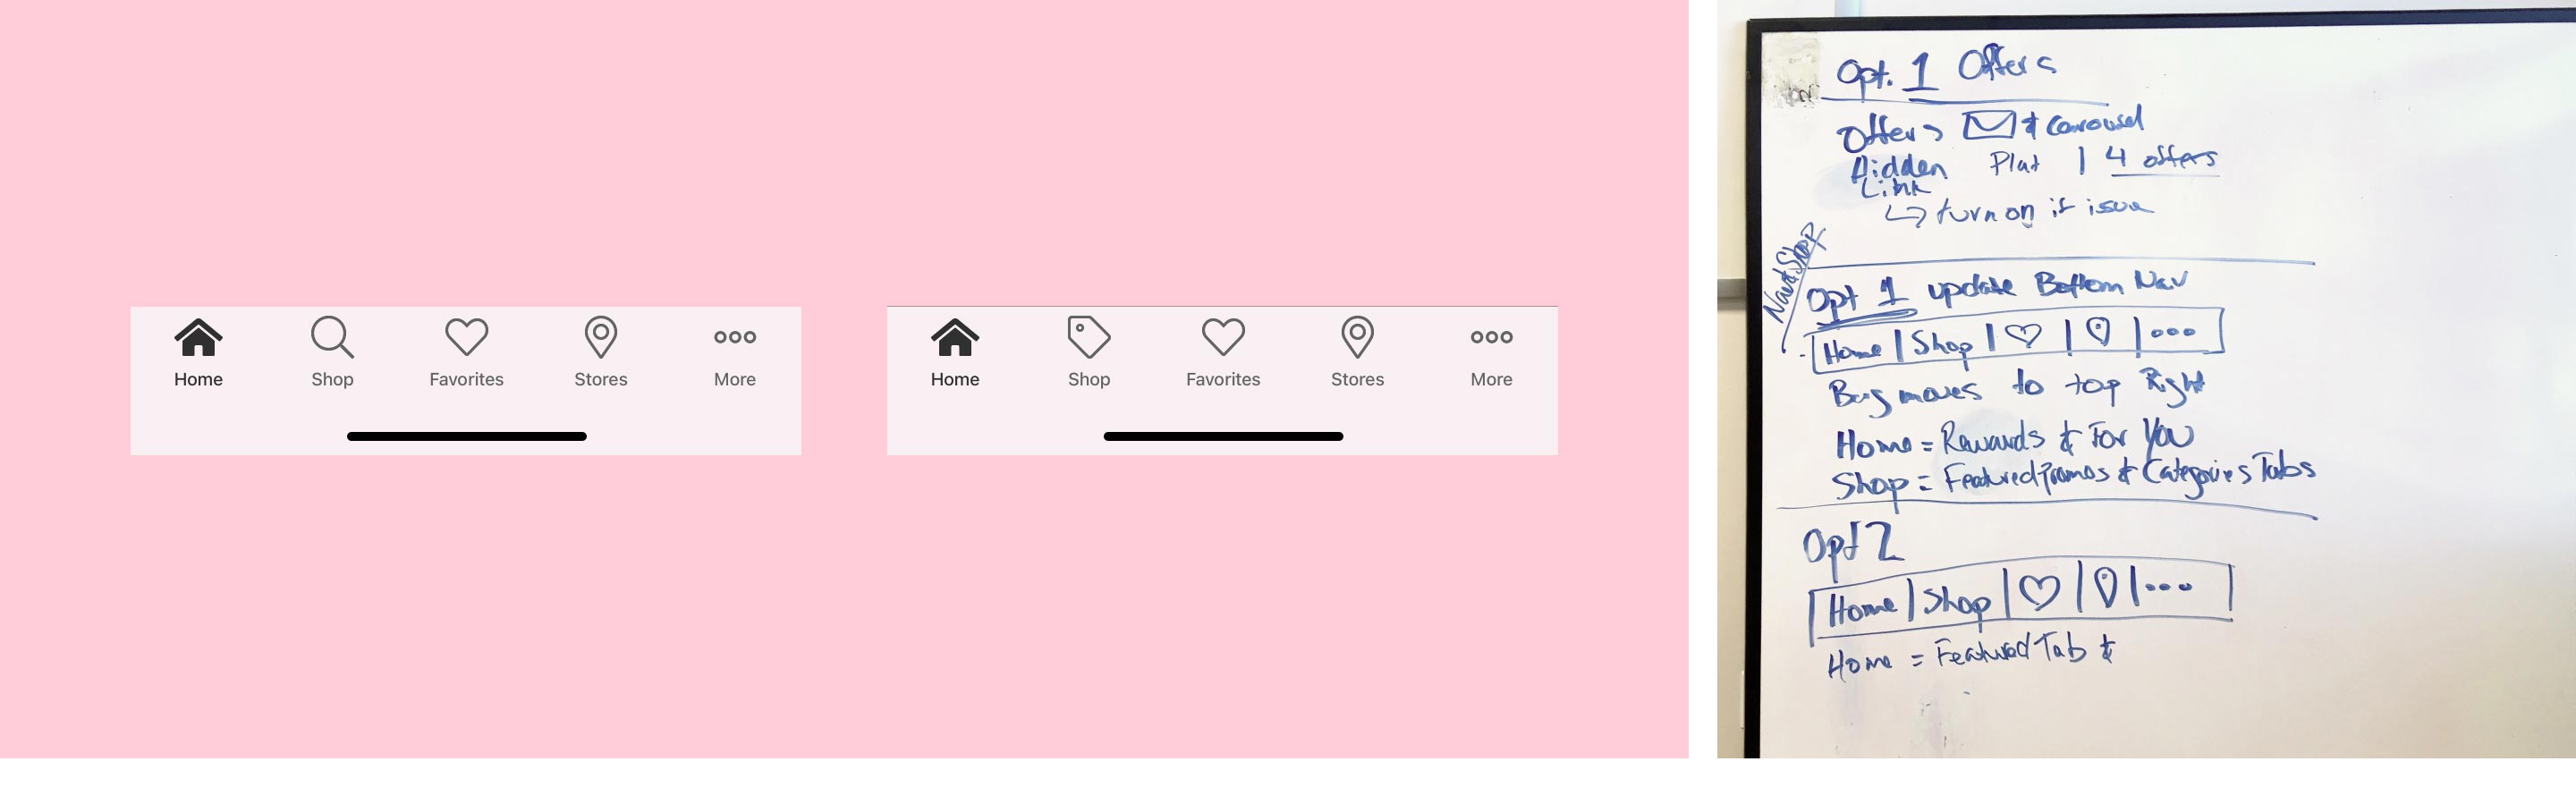 Different designs of tab navigation for Ulta Beauty app